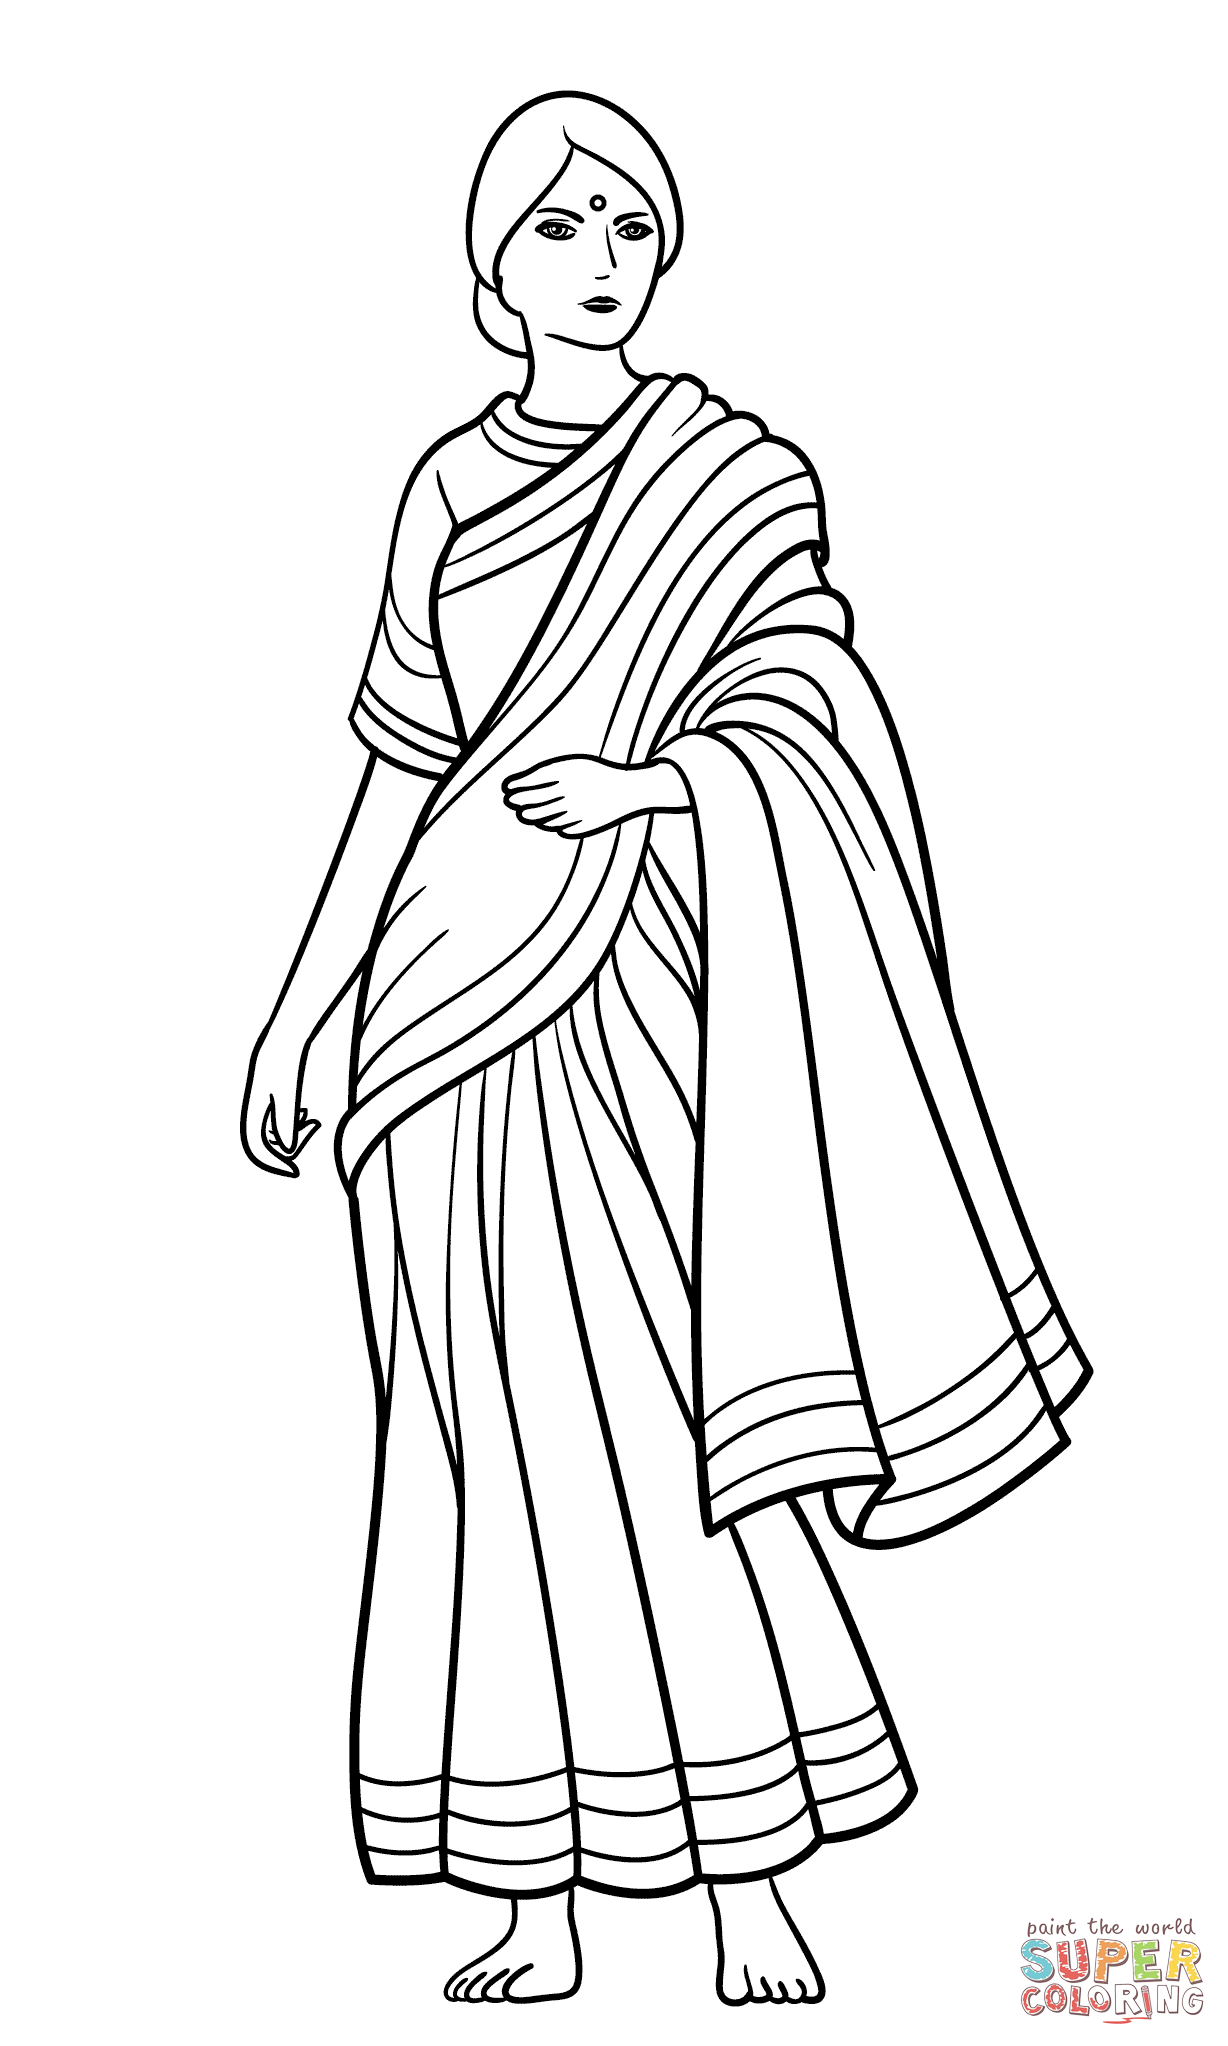 Indian Man Coloring Page - Coloring Home